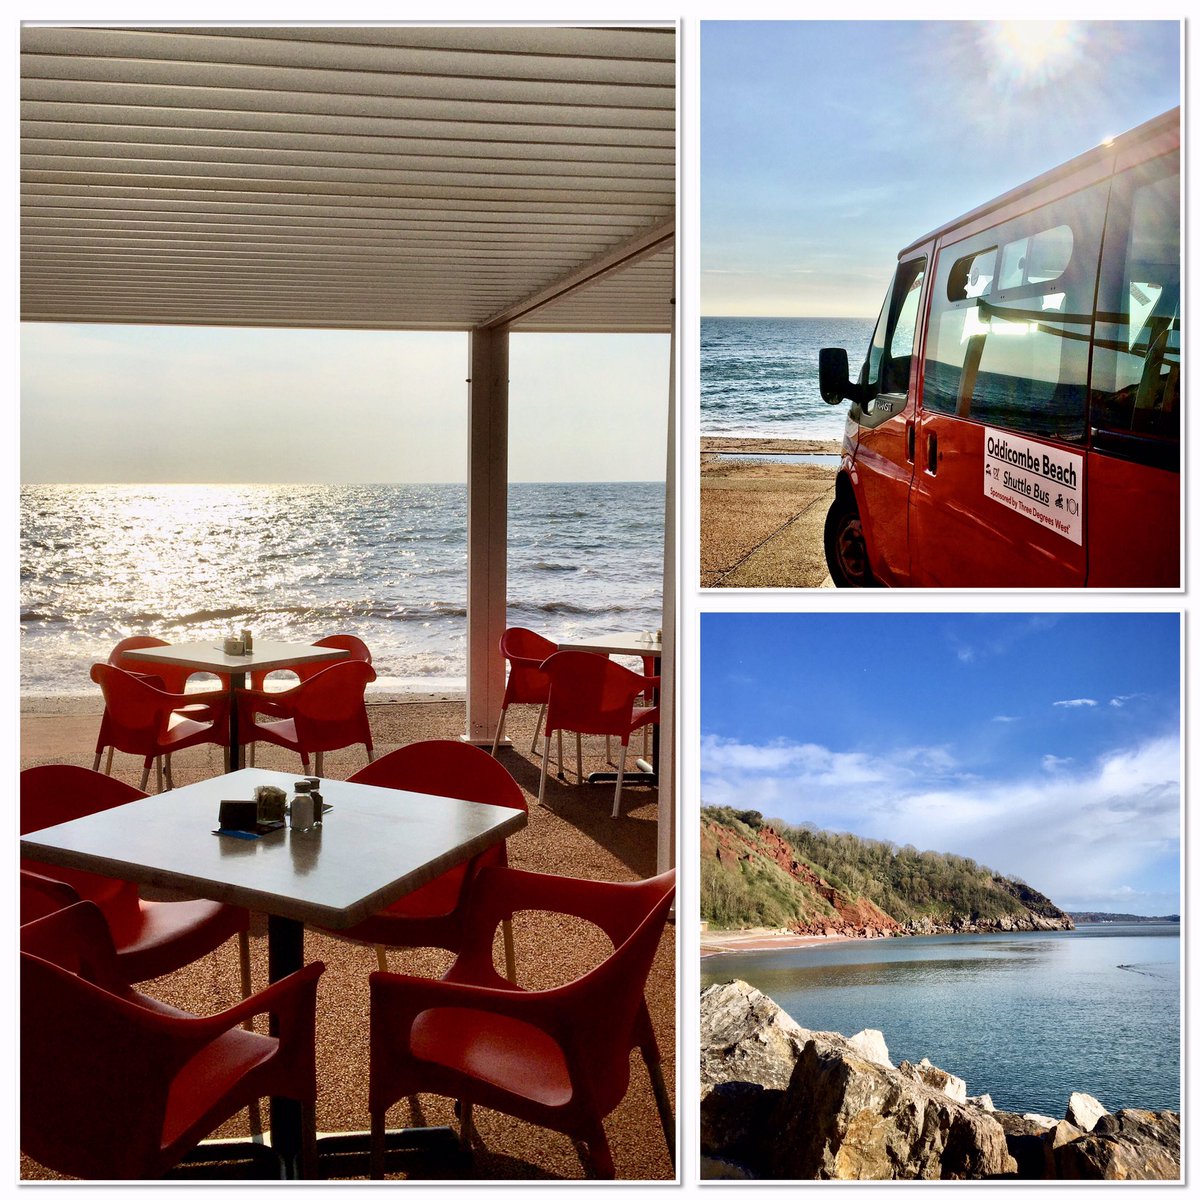 We’re looking forward to a fabulous weekend ahead.

3DW inside & outside dining available (ring on 01803 311202 to book an inside table).

Takeaway brimming with delicious options to eat & drink on the beach.

Bus running up & down the hill so you don’t have to 😊

#myriviera